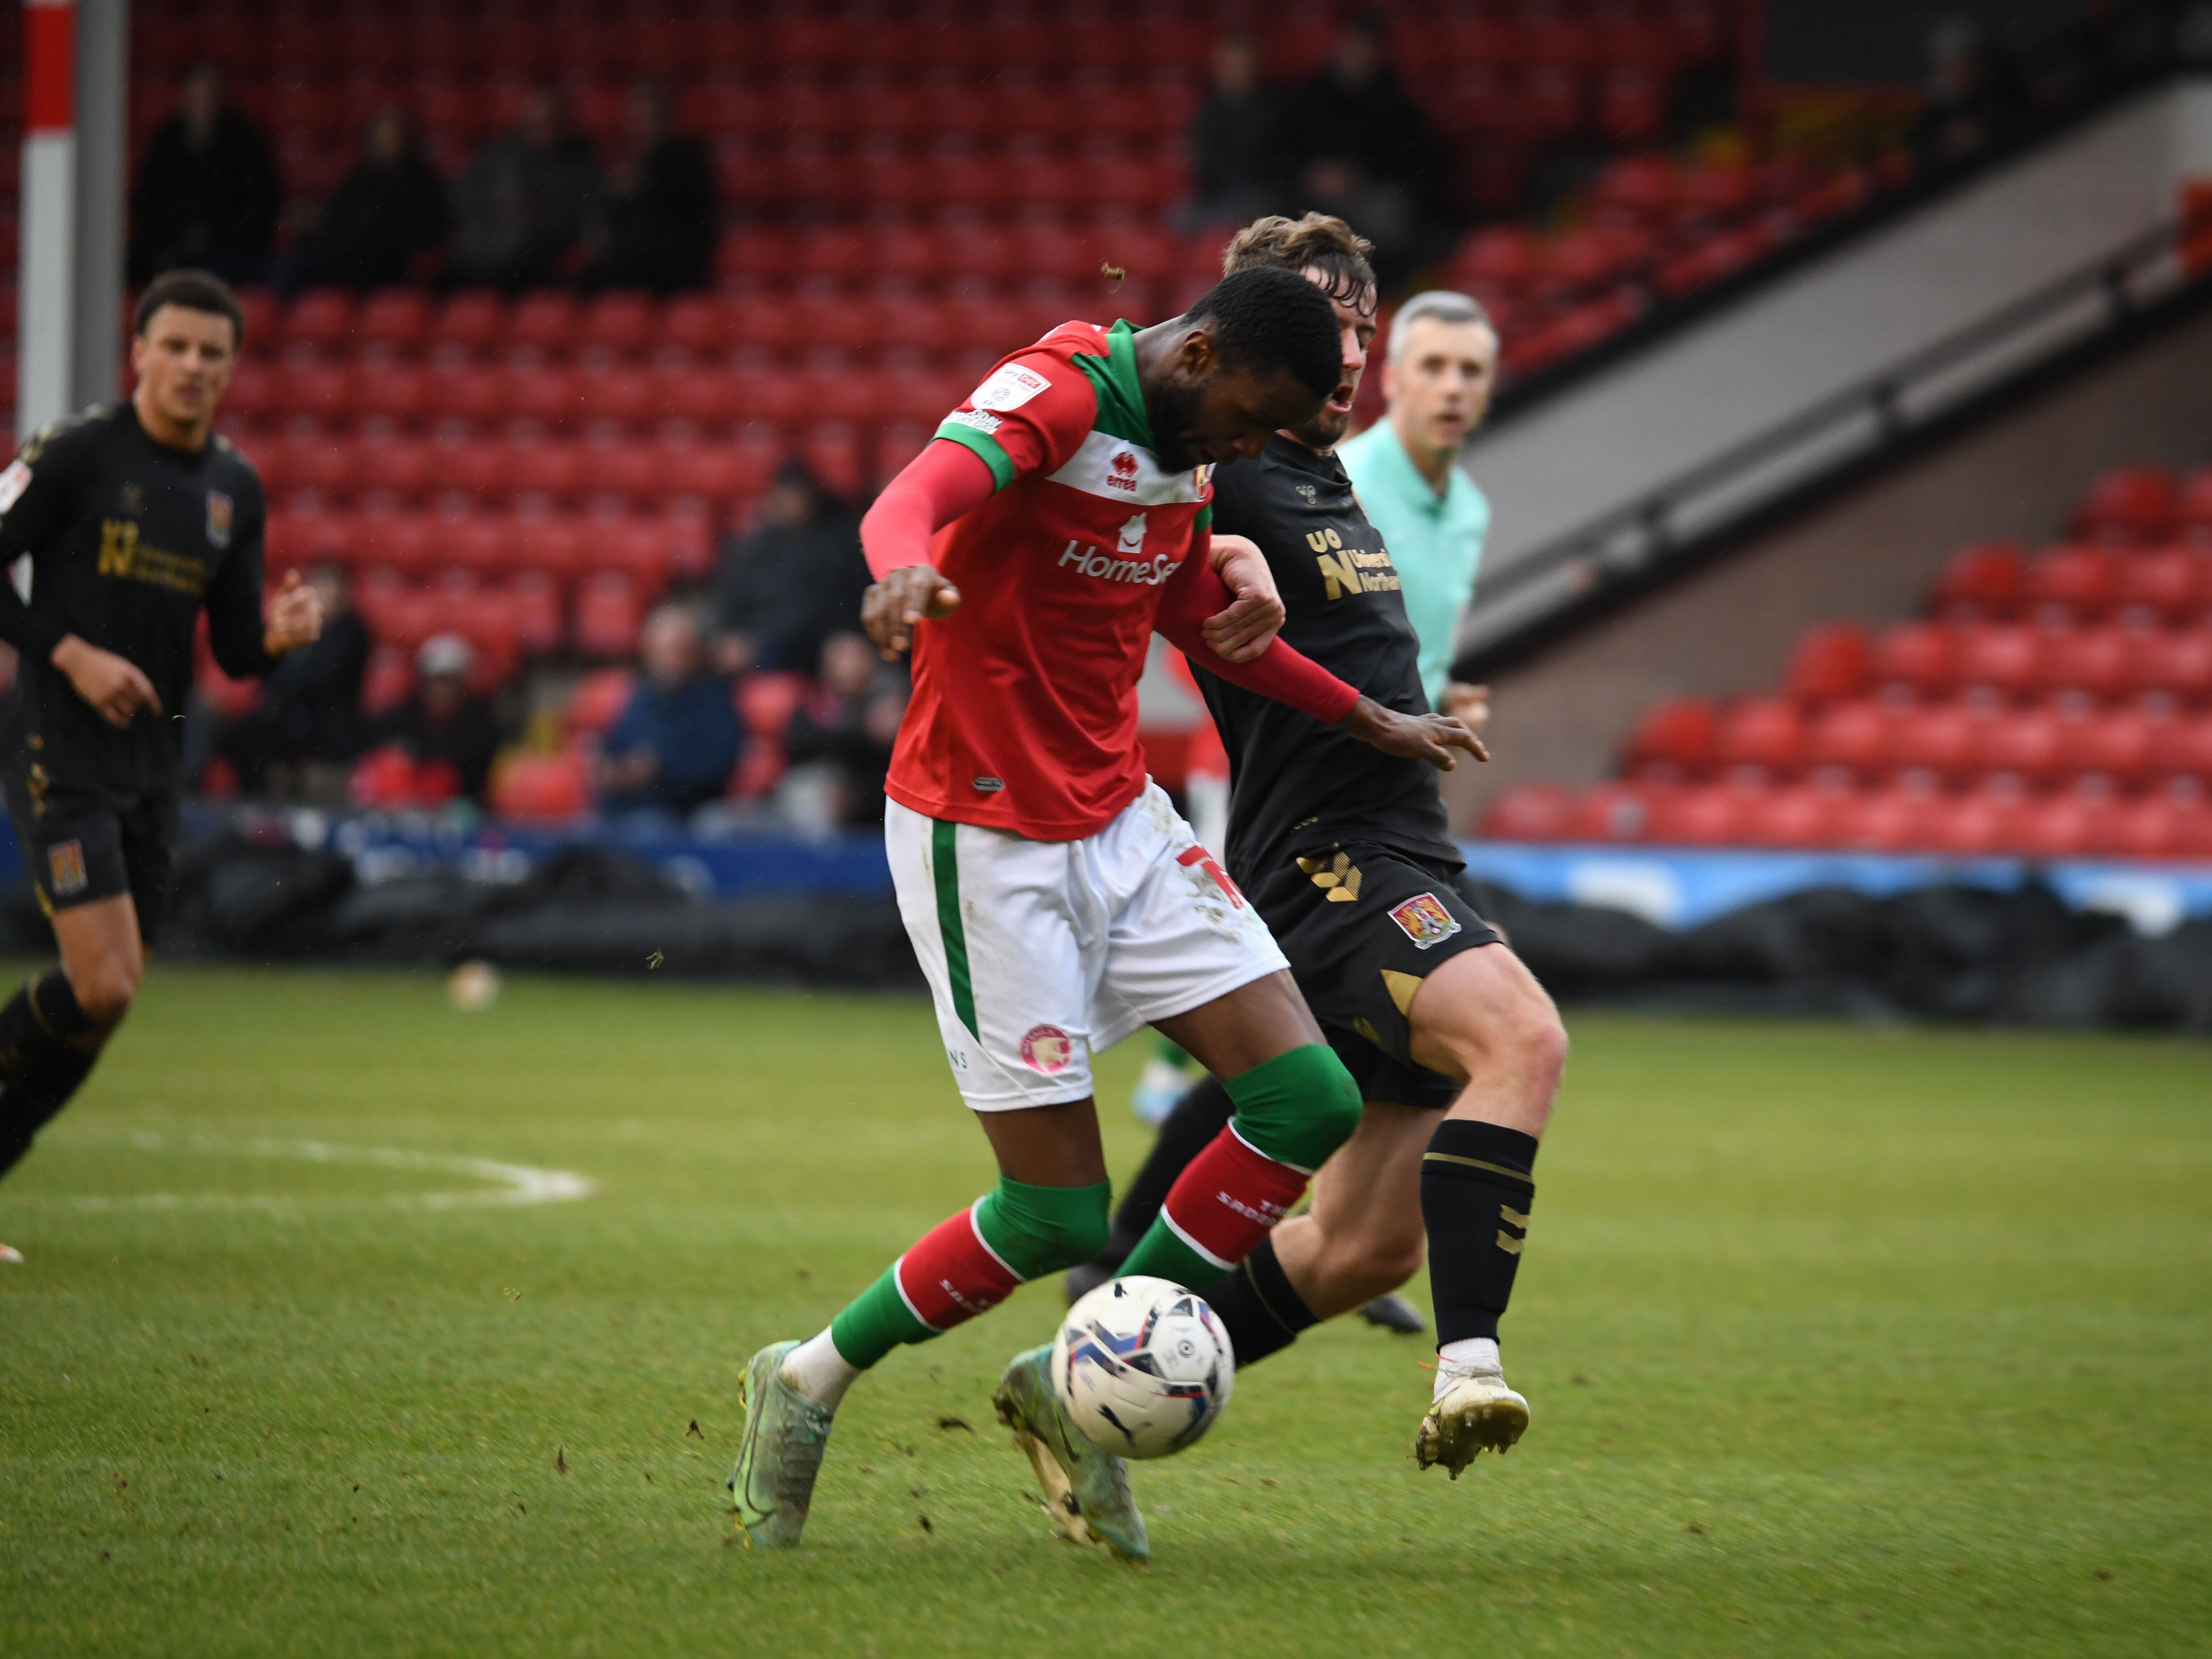 Analysis: Seventh Walsall defeat would be too much to ignore